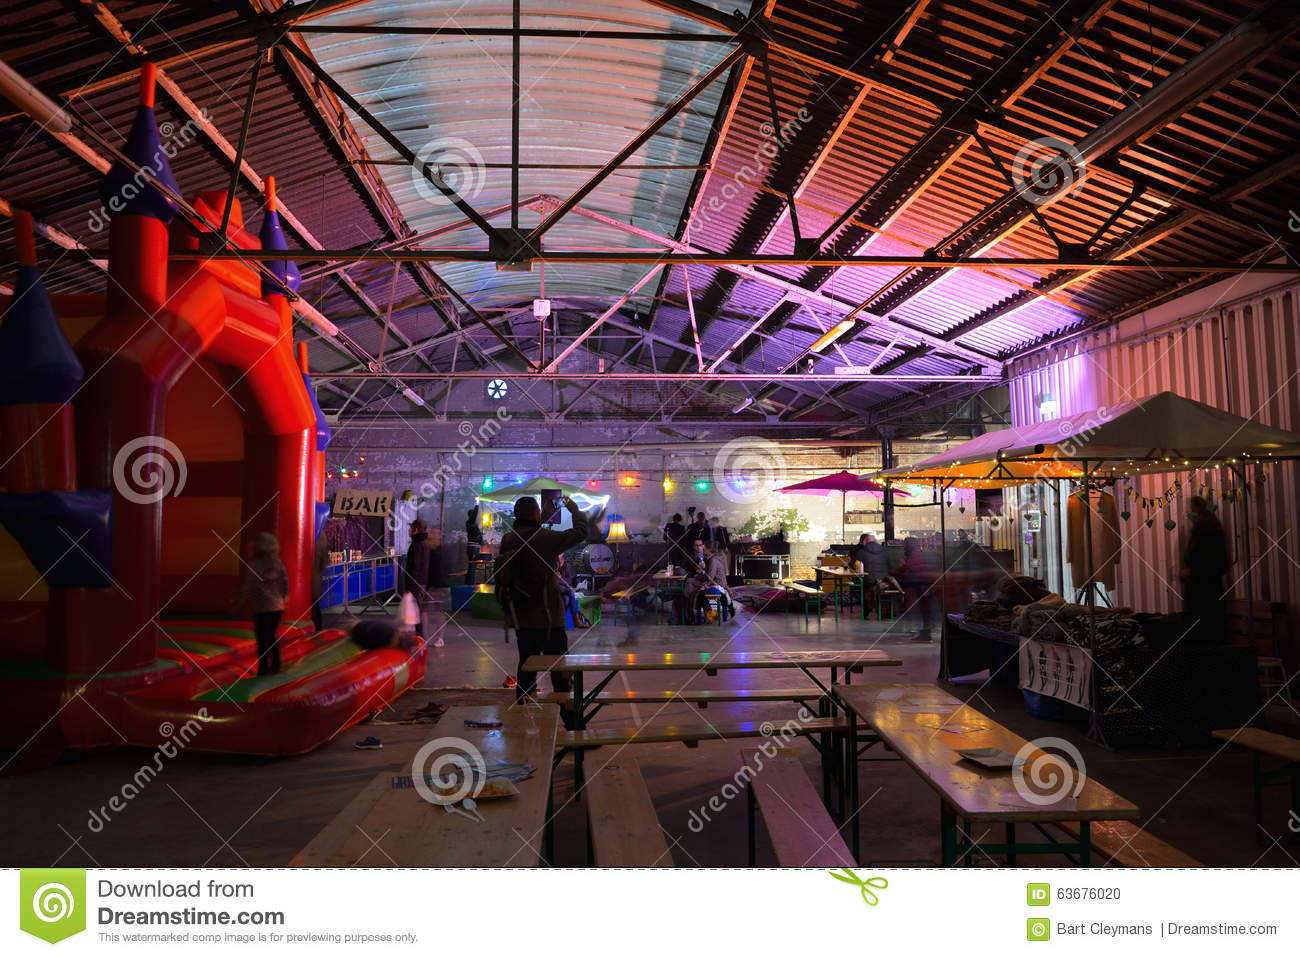 Interior Food Stands And Concert Space And A Jumpimg Castle For Kids